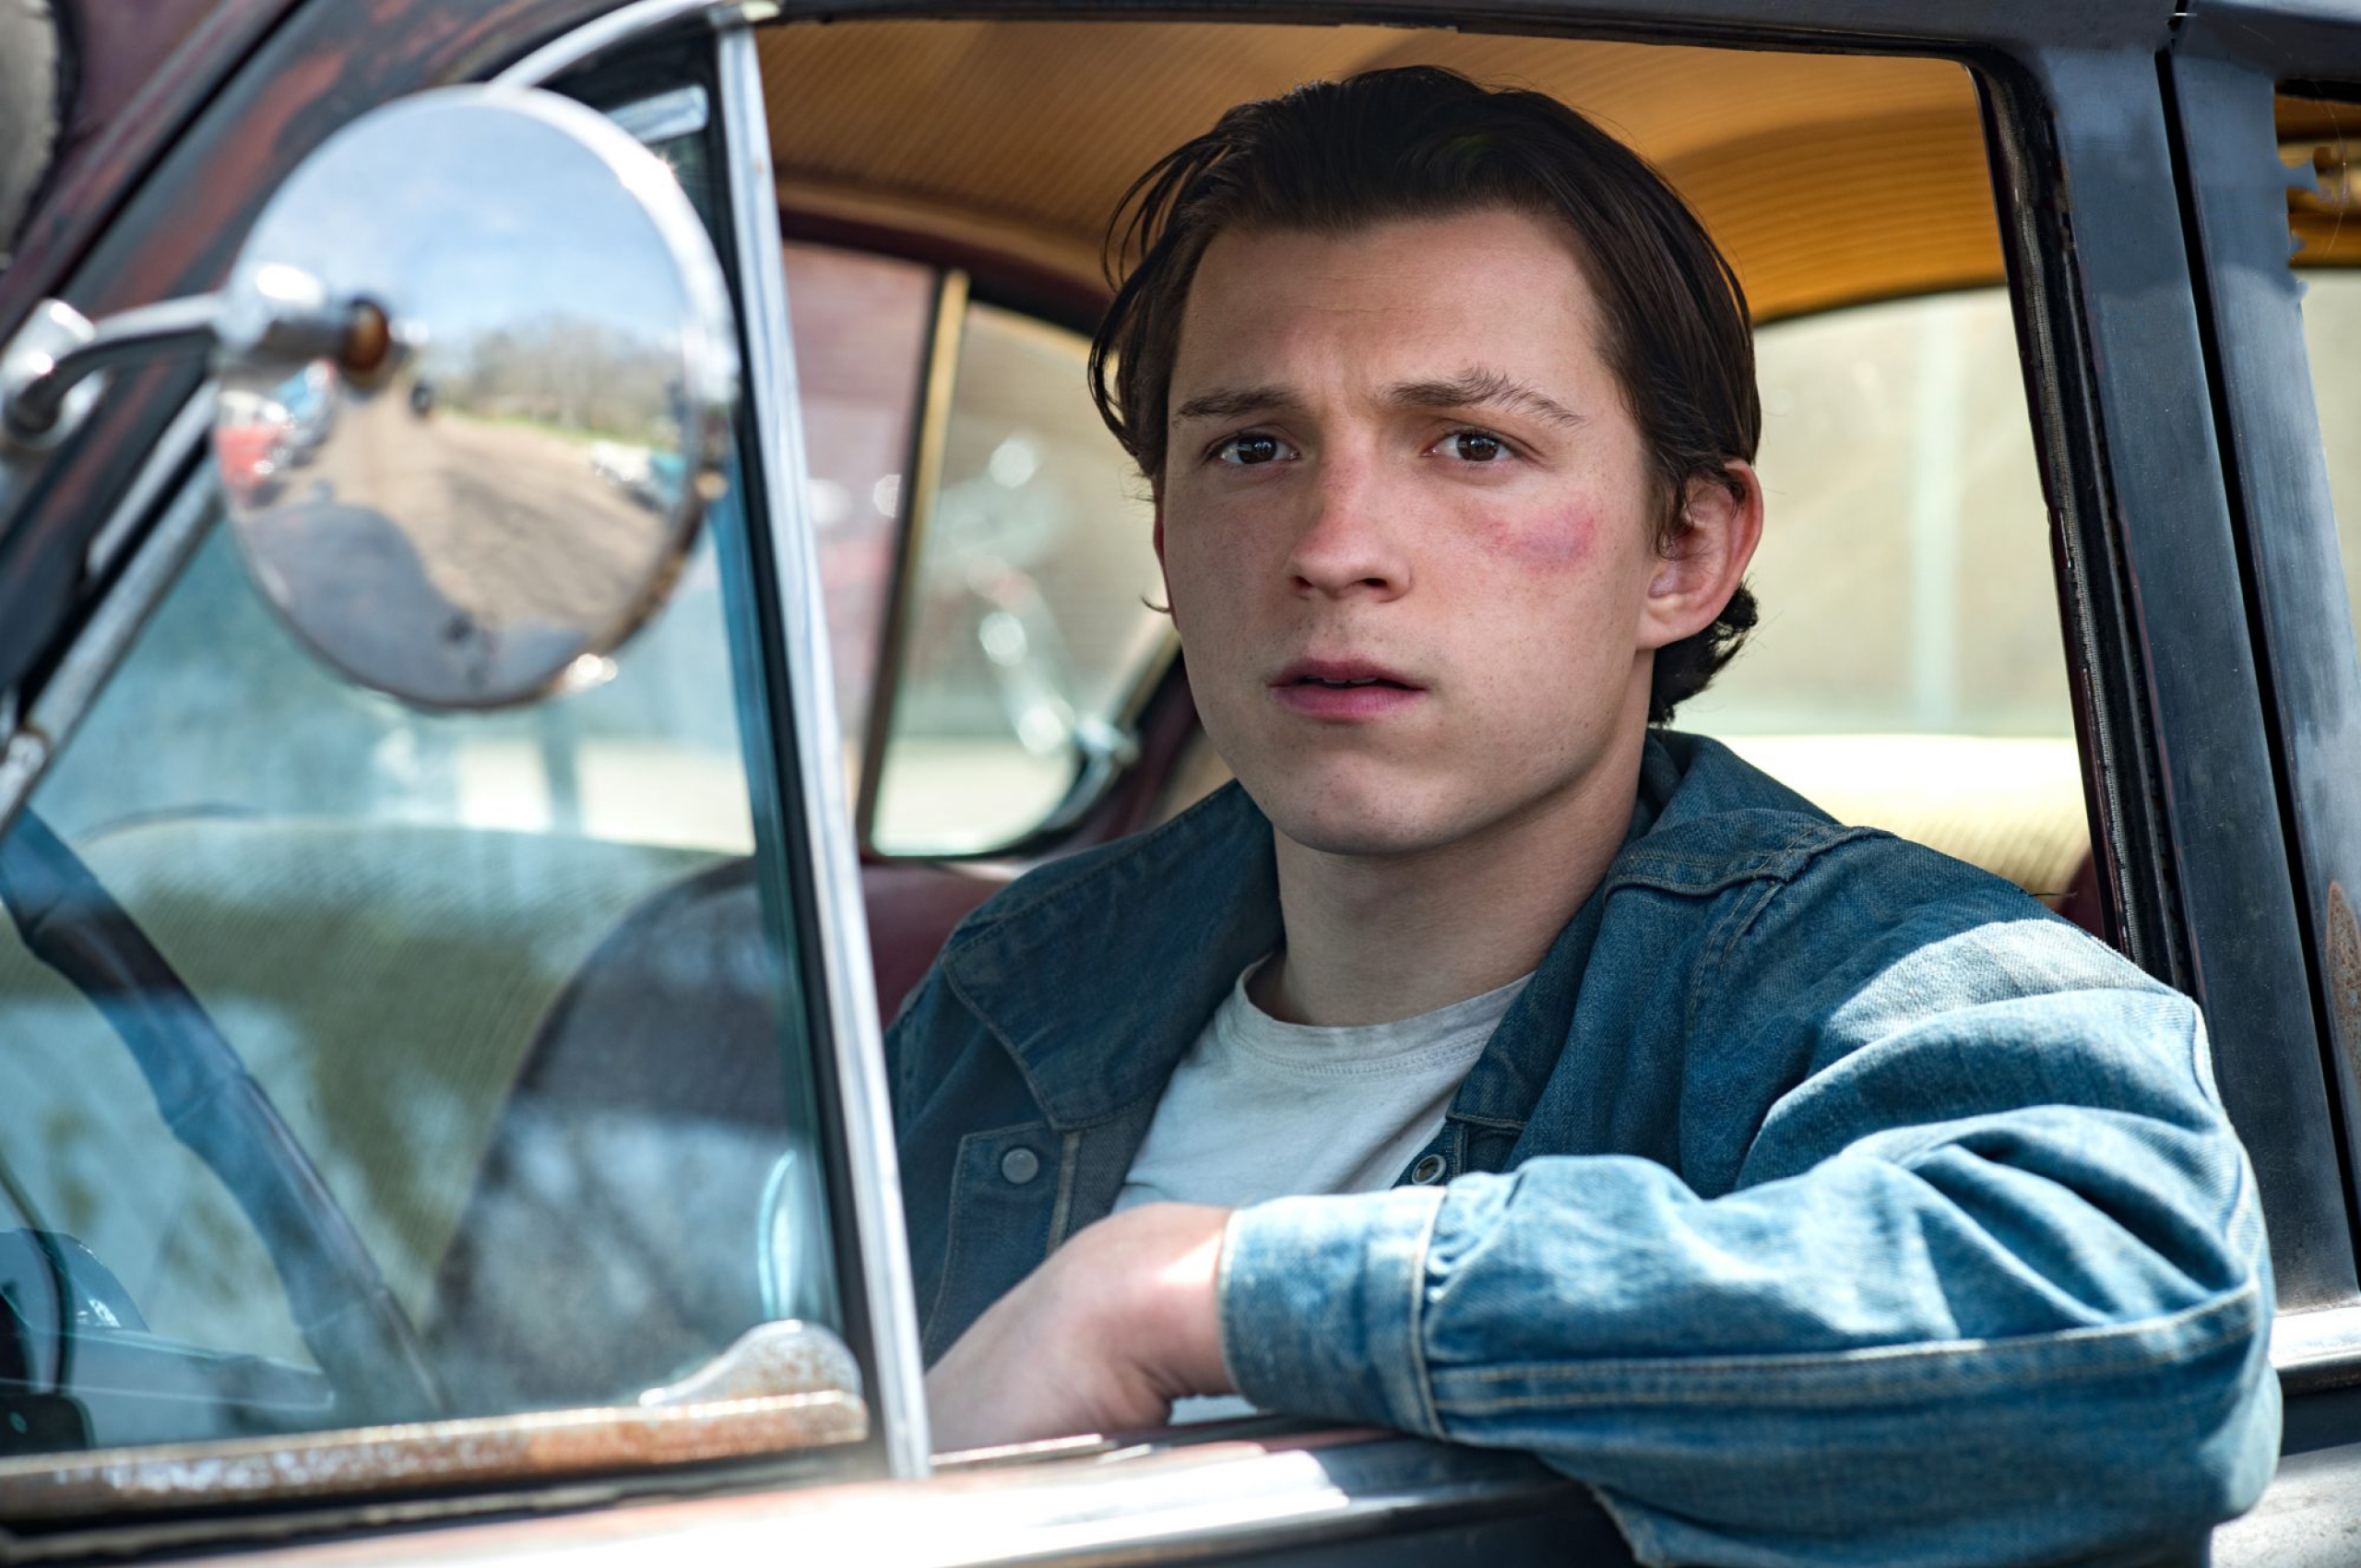 Tom Holland The Devil All the Time Chromebook Pixel Wallpaper, HD Movies 4K Wallpaper, Image, Photo and Background